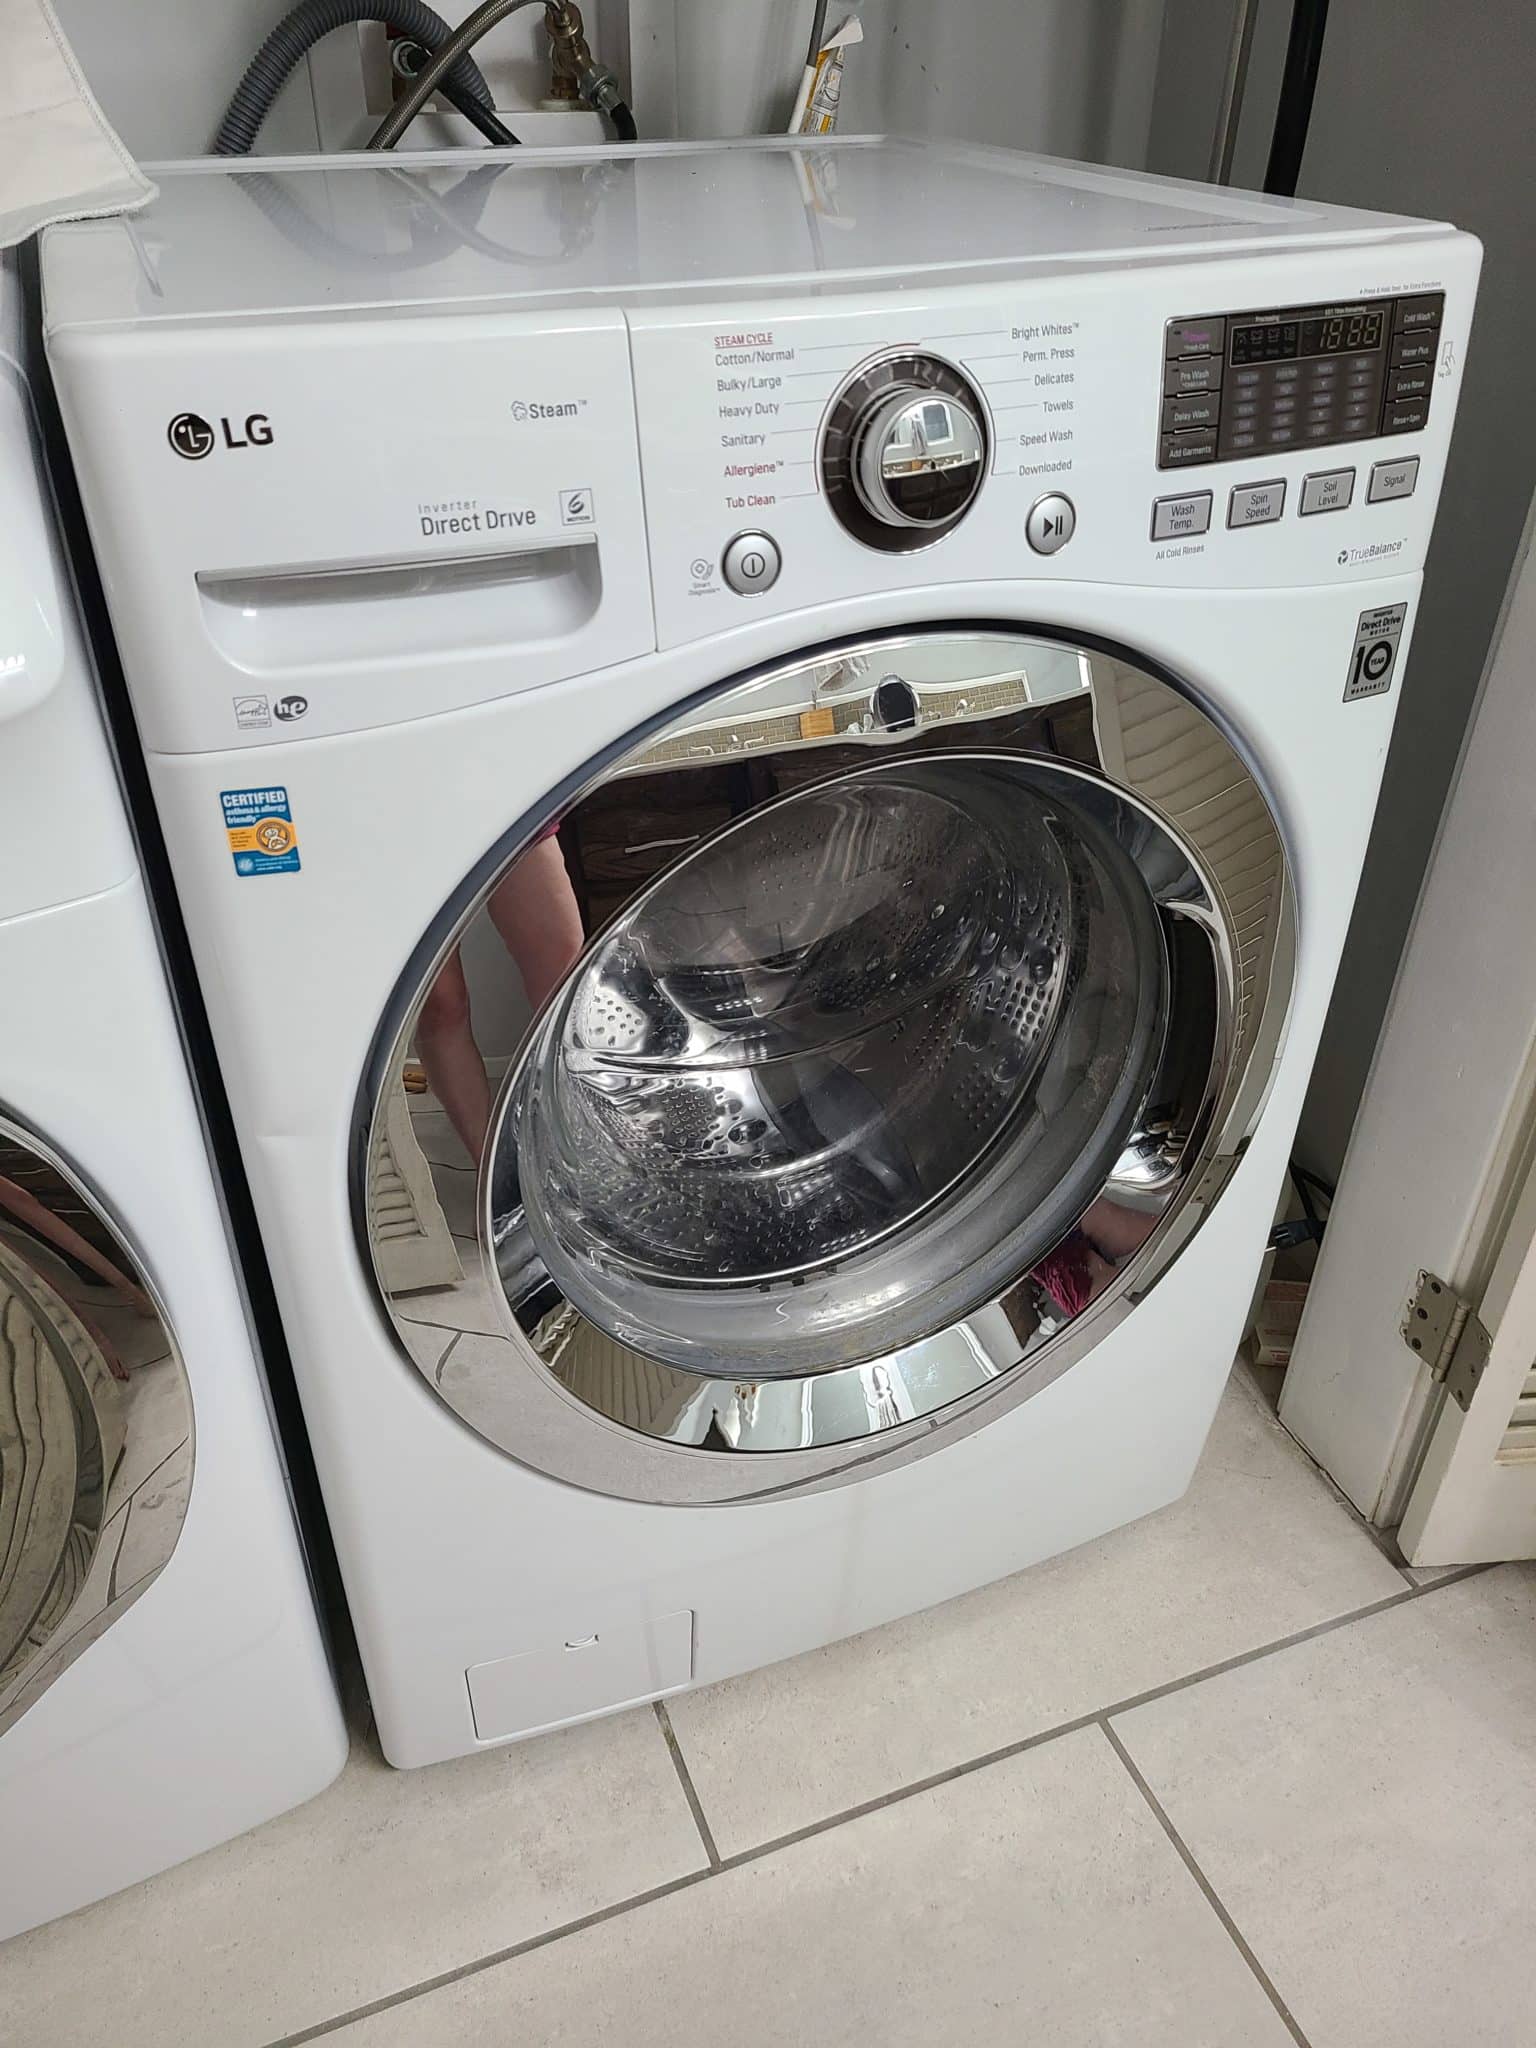 HE washer shown and used for Earth Breeze detergent sheets